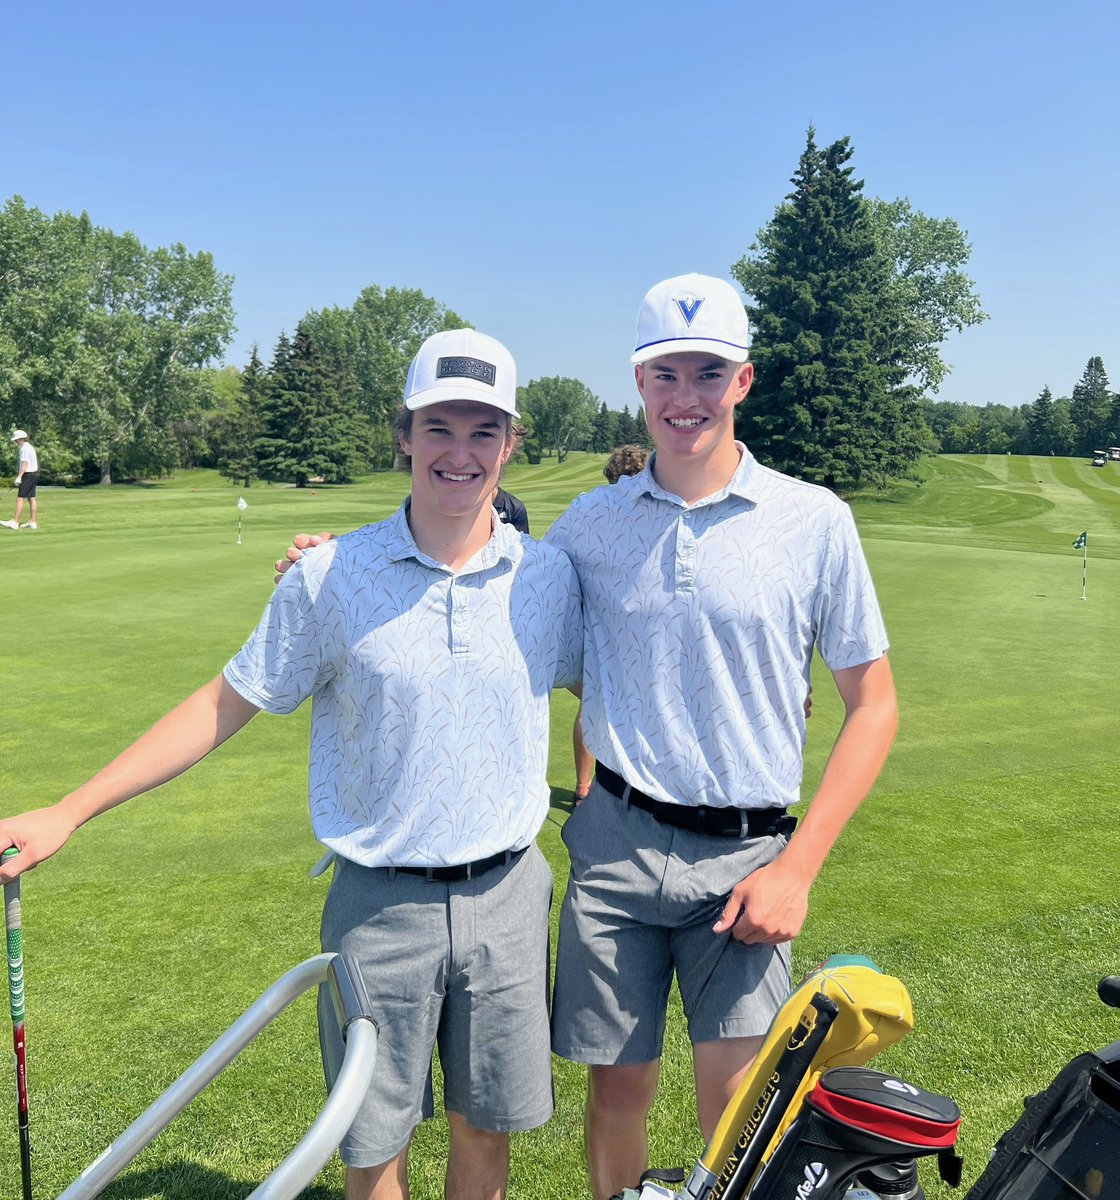 Thanks MHS for teaming these two up in a school Golf tourney up in Prince Albert. They played 6 holes scramble, 6 holes best ball and 6 holes alternate shot. They didn’t win but they had fun together! Will be the last time that play a school sport together. #grad2023 #brothers